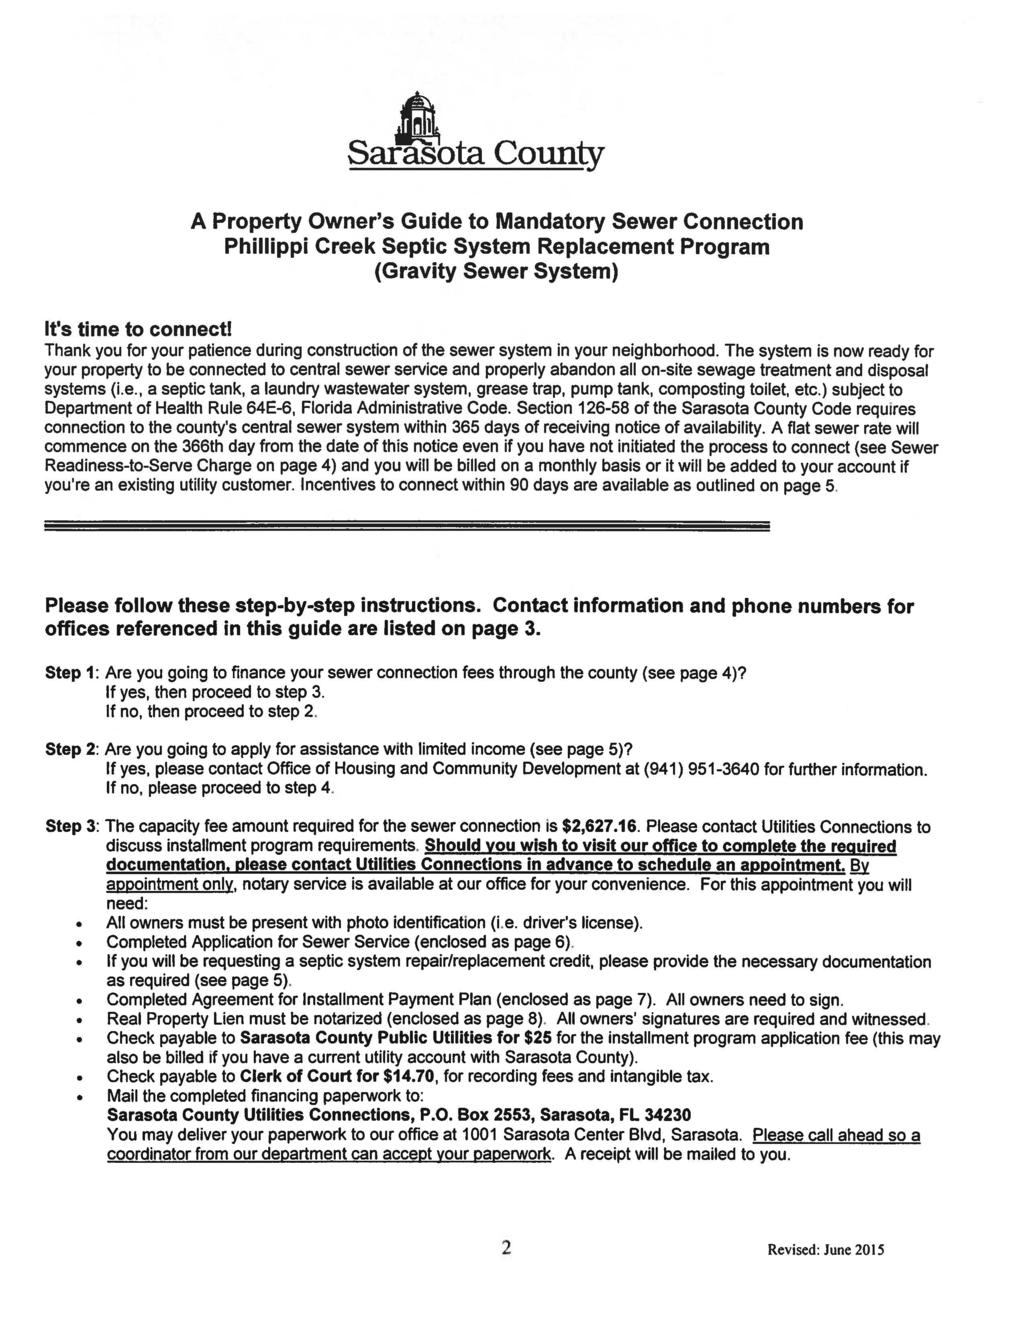 a County A Property Owner's Guide to Mandatory Sewer Connection Phillippi Creek Septic System Replacement Program (Gravity Sewer System) It's time to connect!